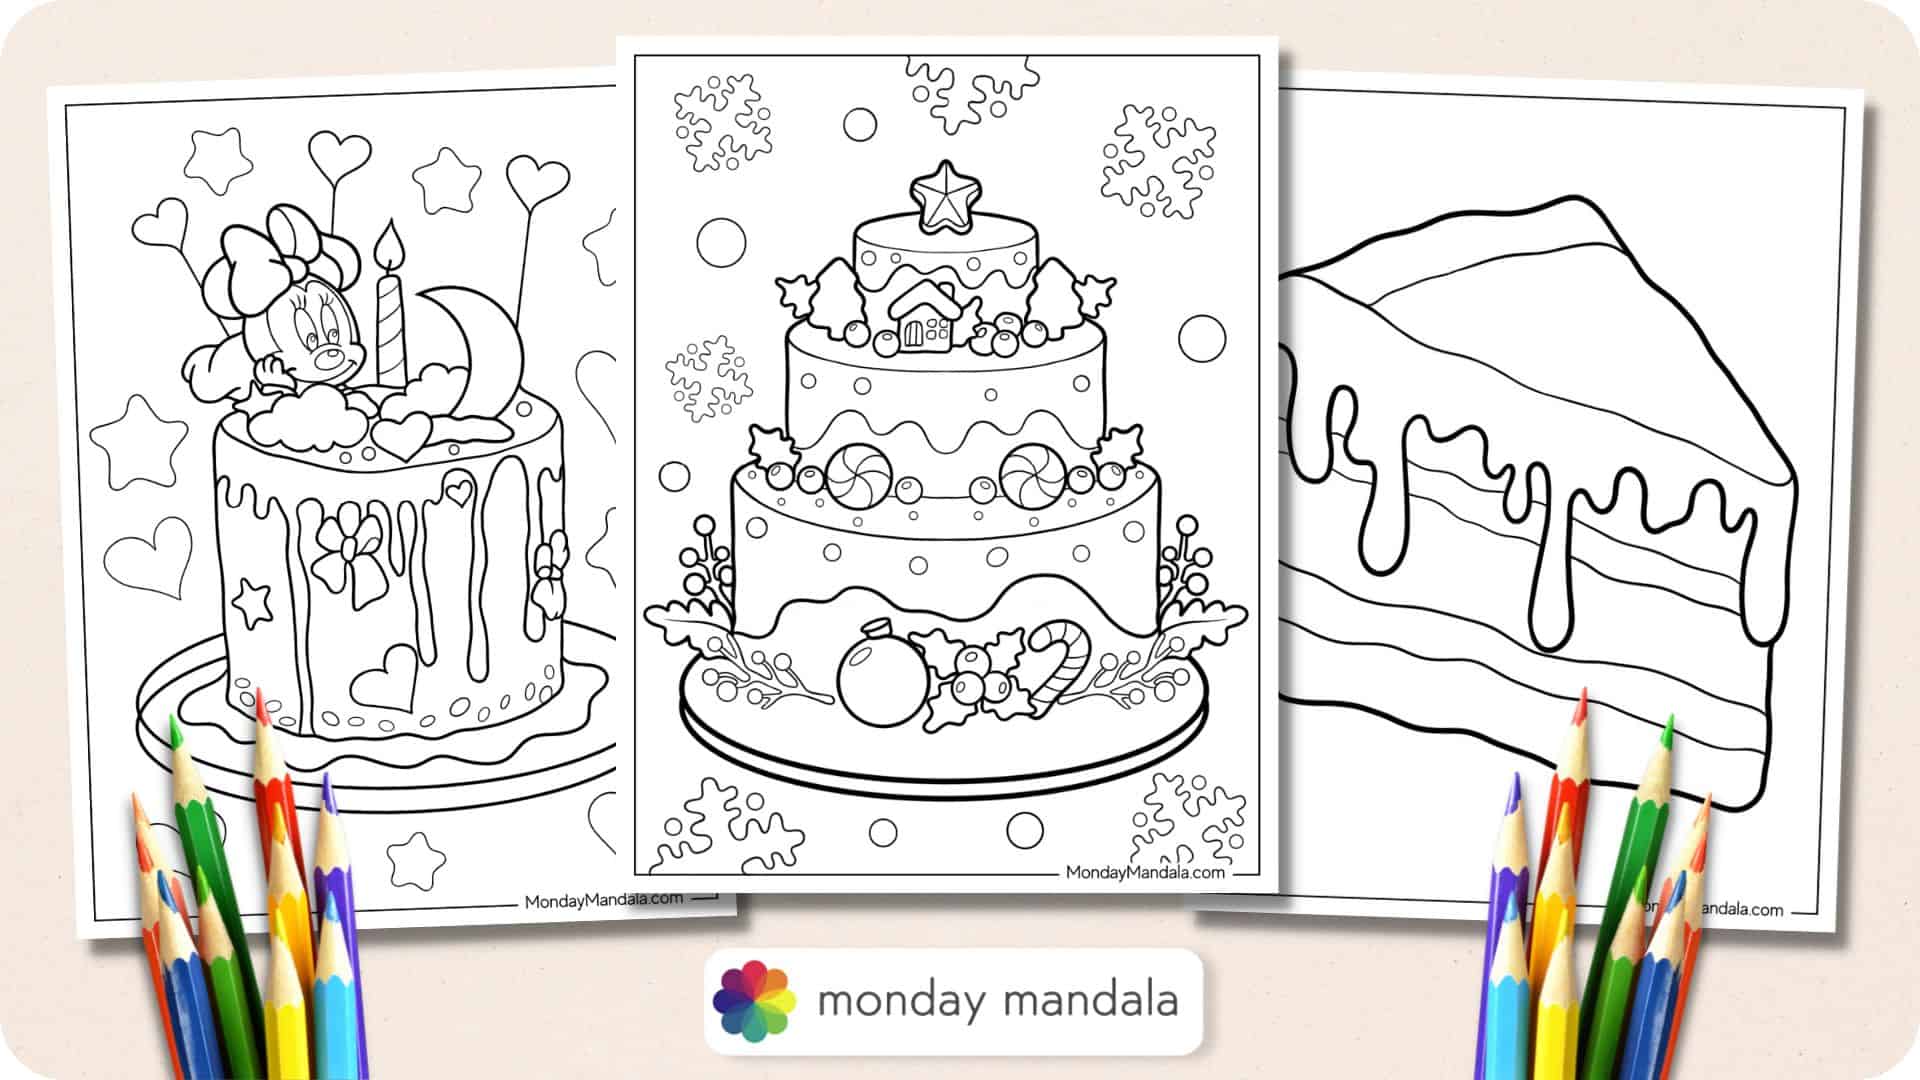 Cake coloring pages free pdf printables